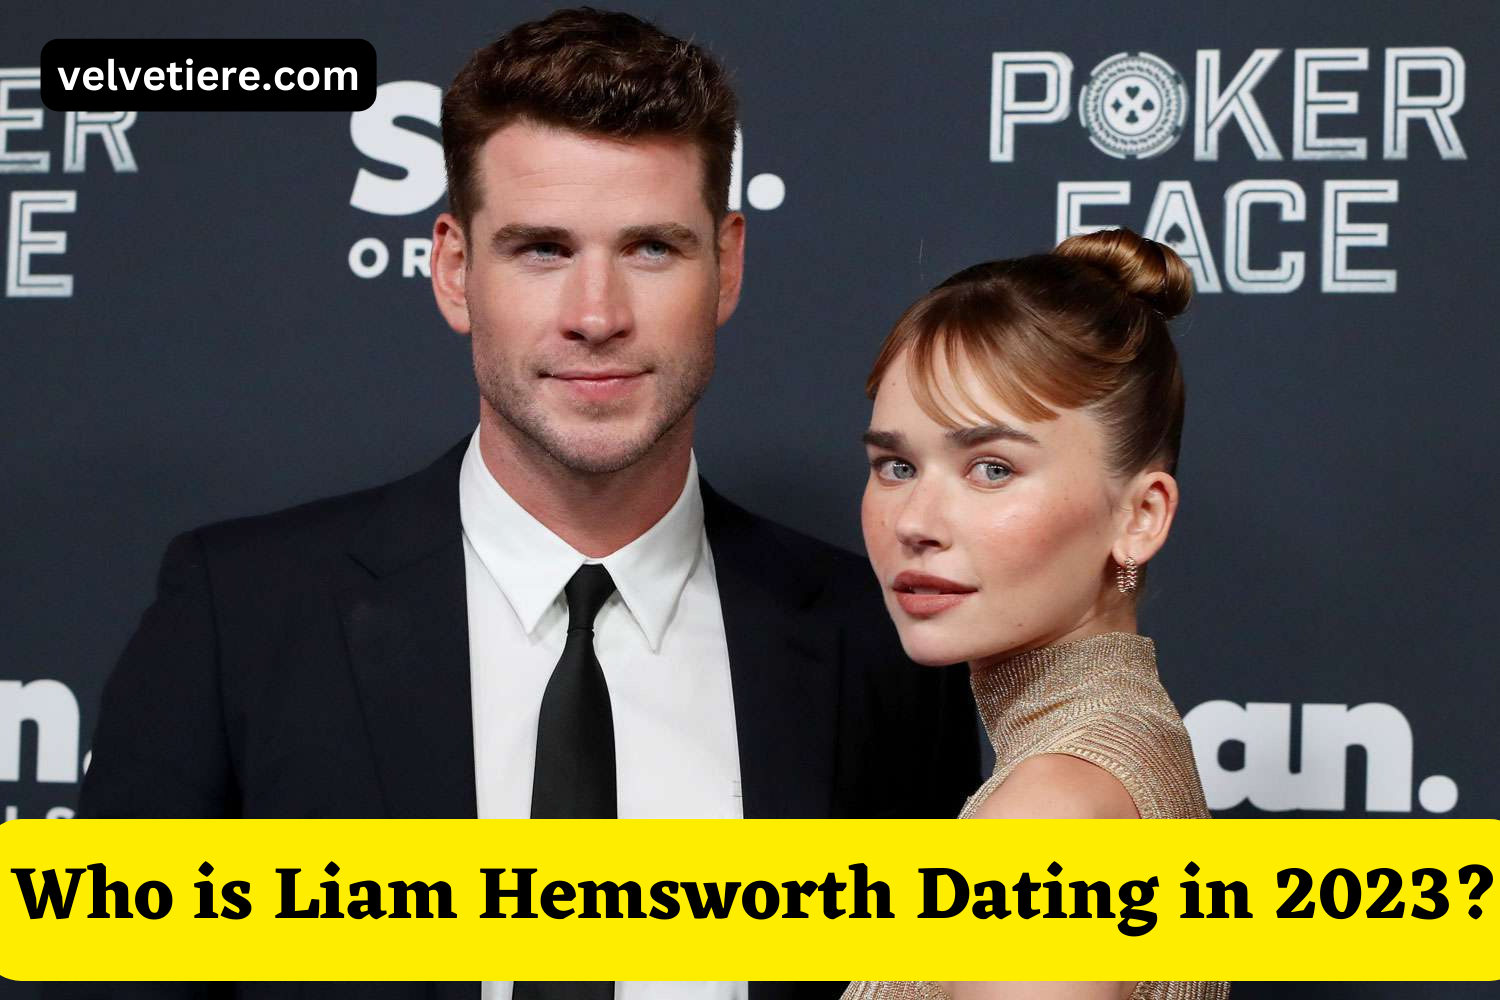 Who is Liam Hemsworth Dating in 2023?